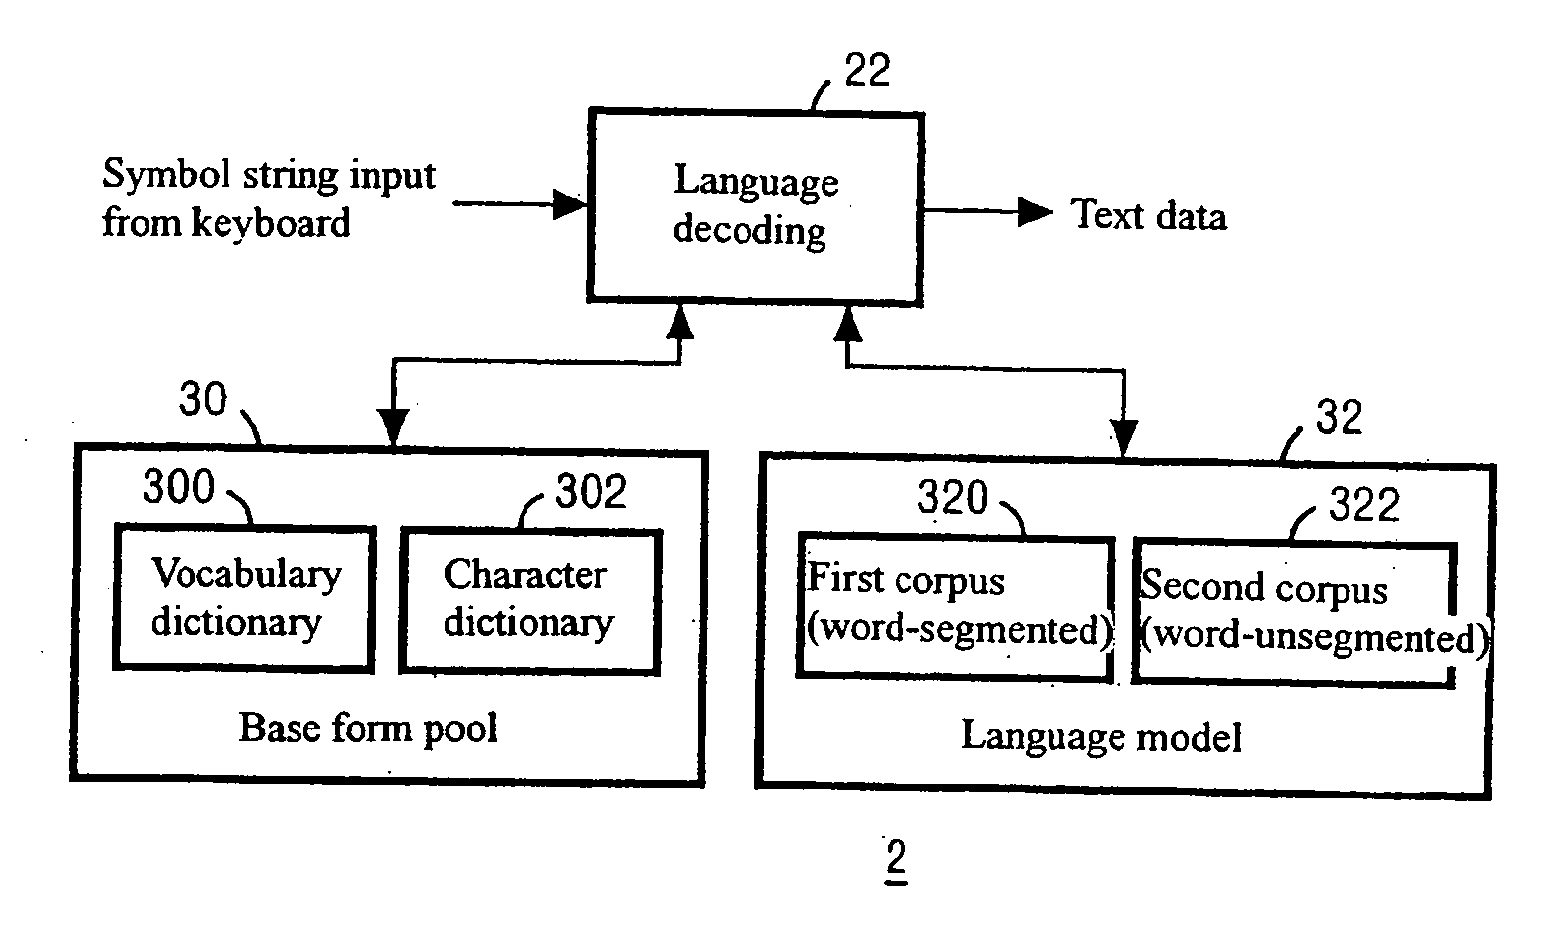 Word boundary probability estimating, probabilistic language model building, kana-kanji converting, and unknown word model building